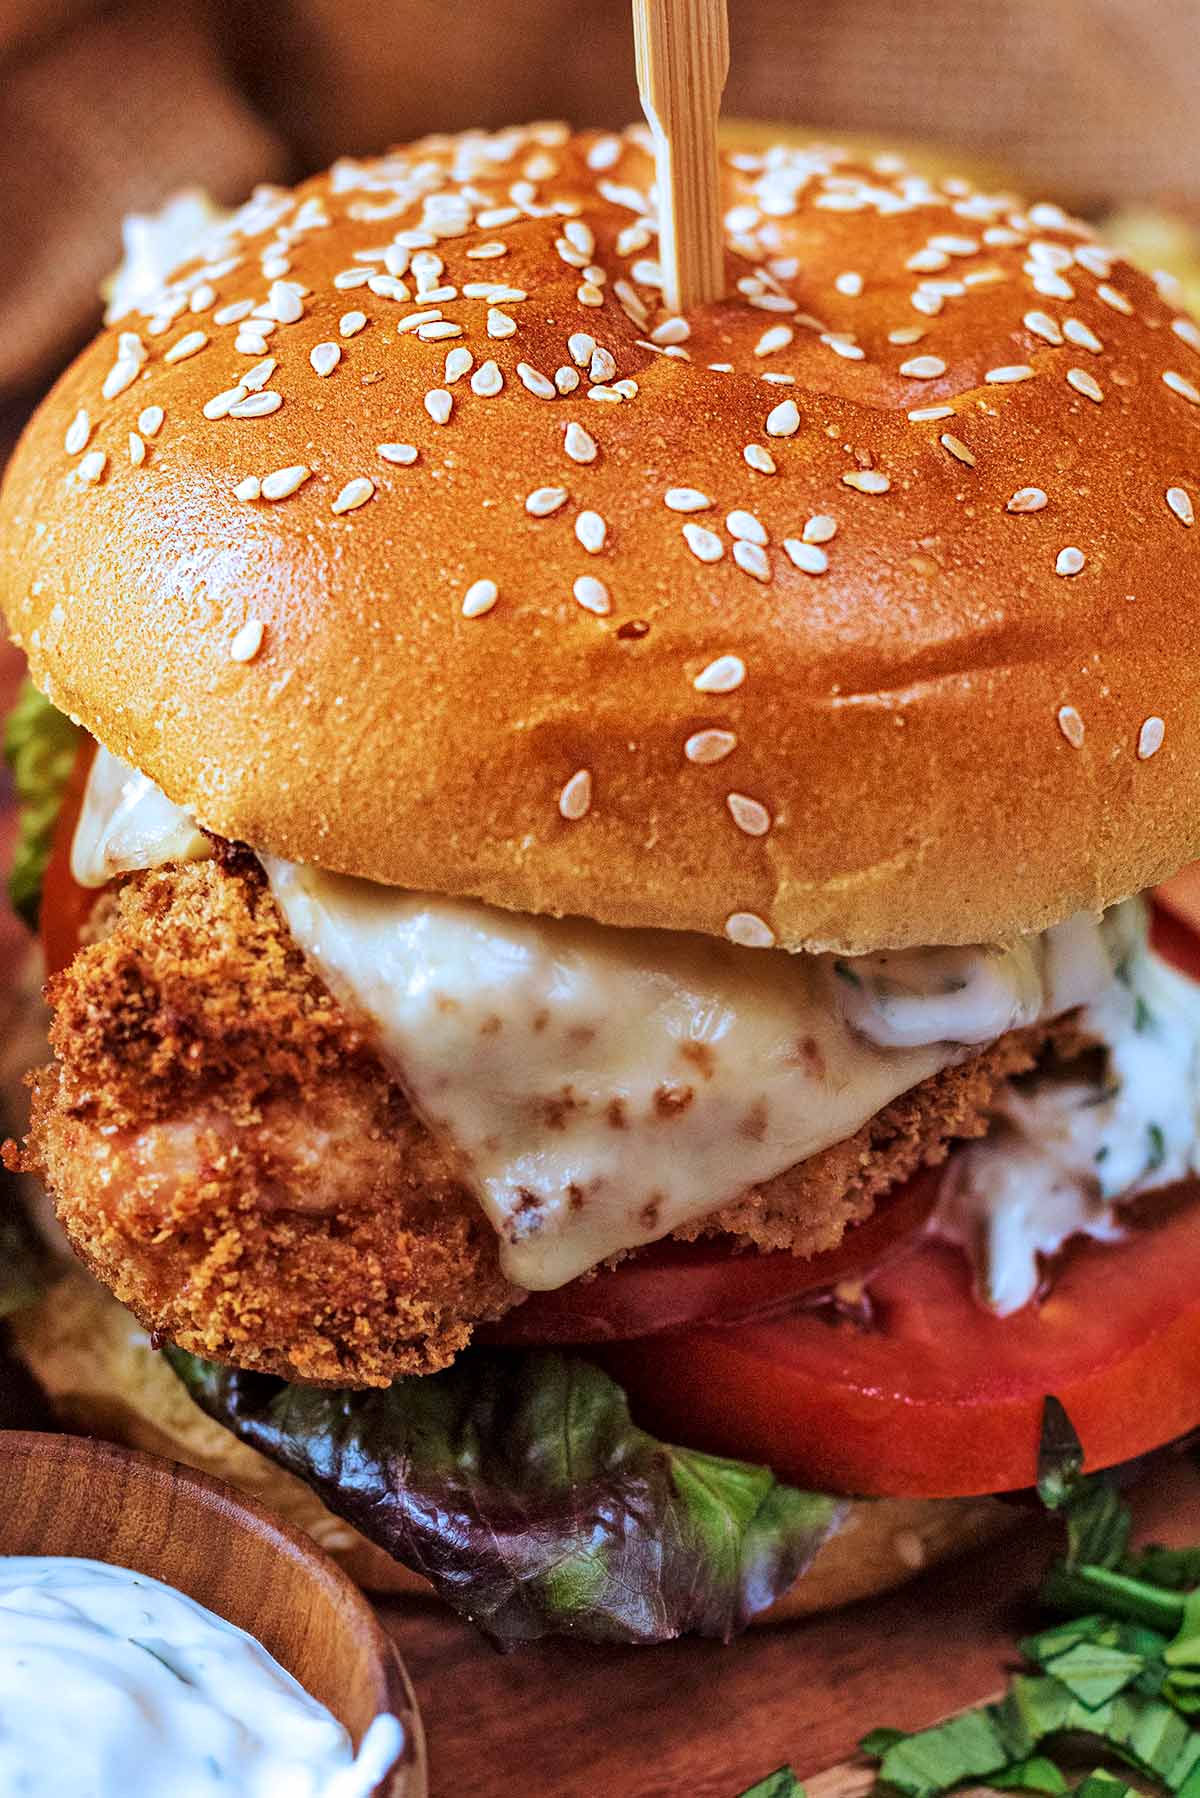 Breaded chicken topped with cheese in a sesame seed brioche bun with lettuce and tomato.